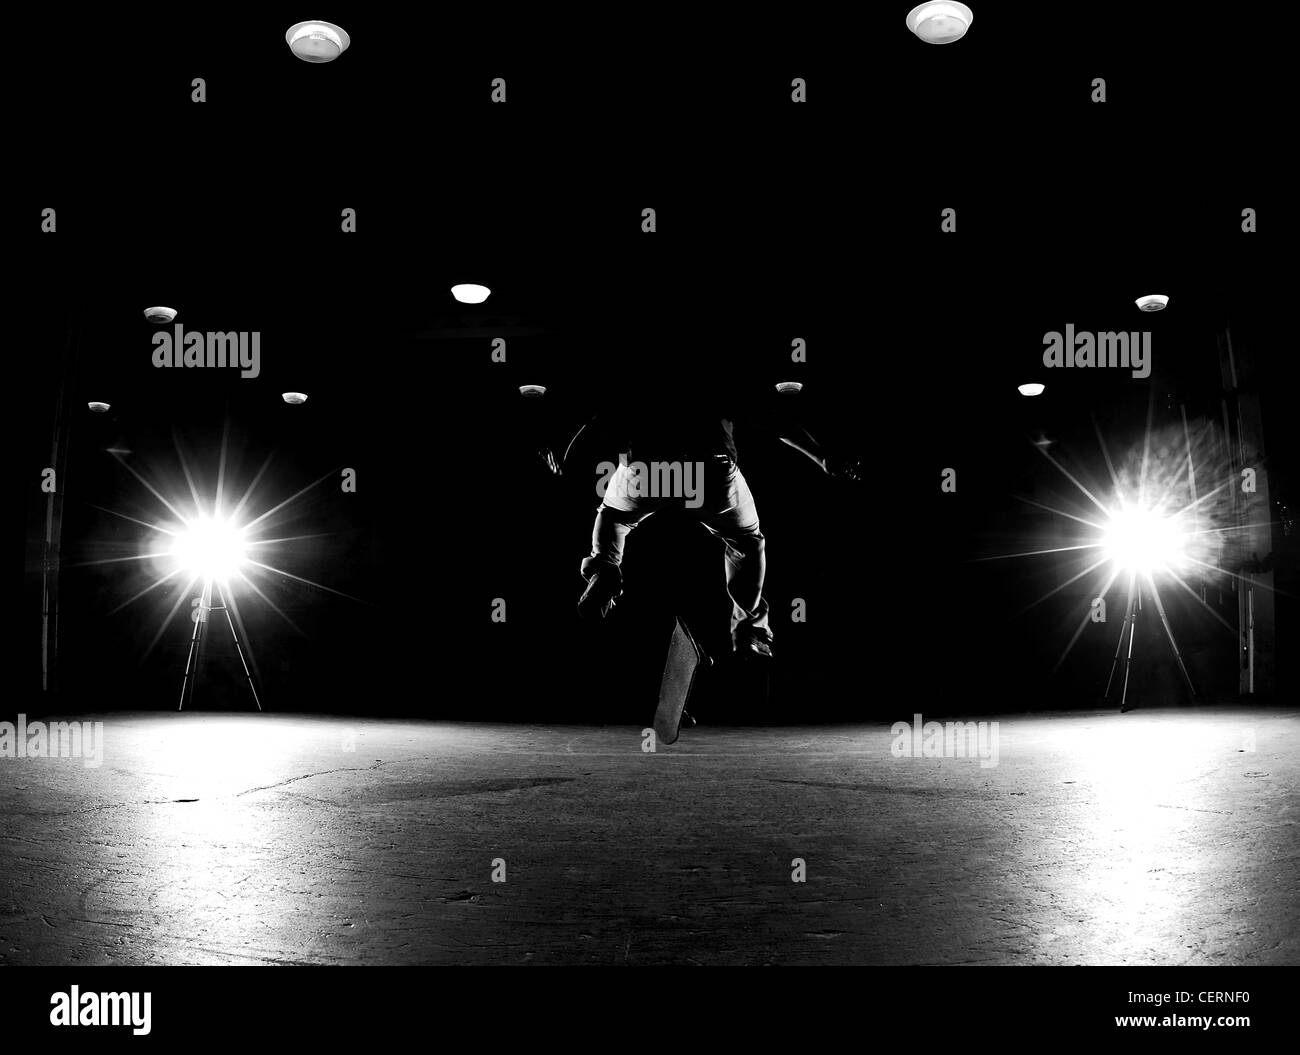 A black and white photo of a skateboarder performing a flip trick. Stock Photo